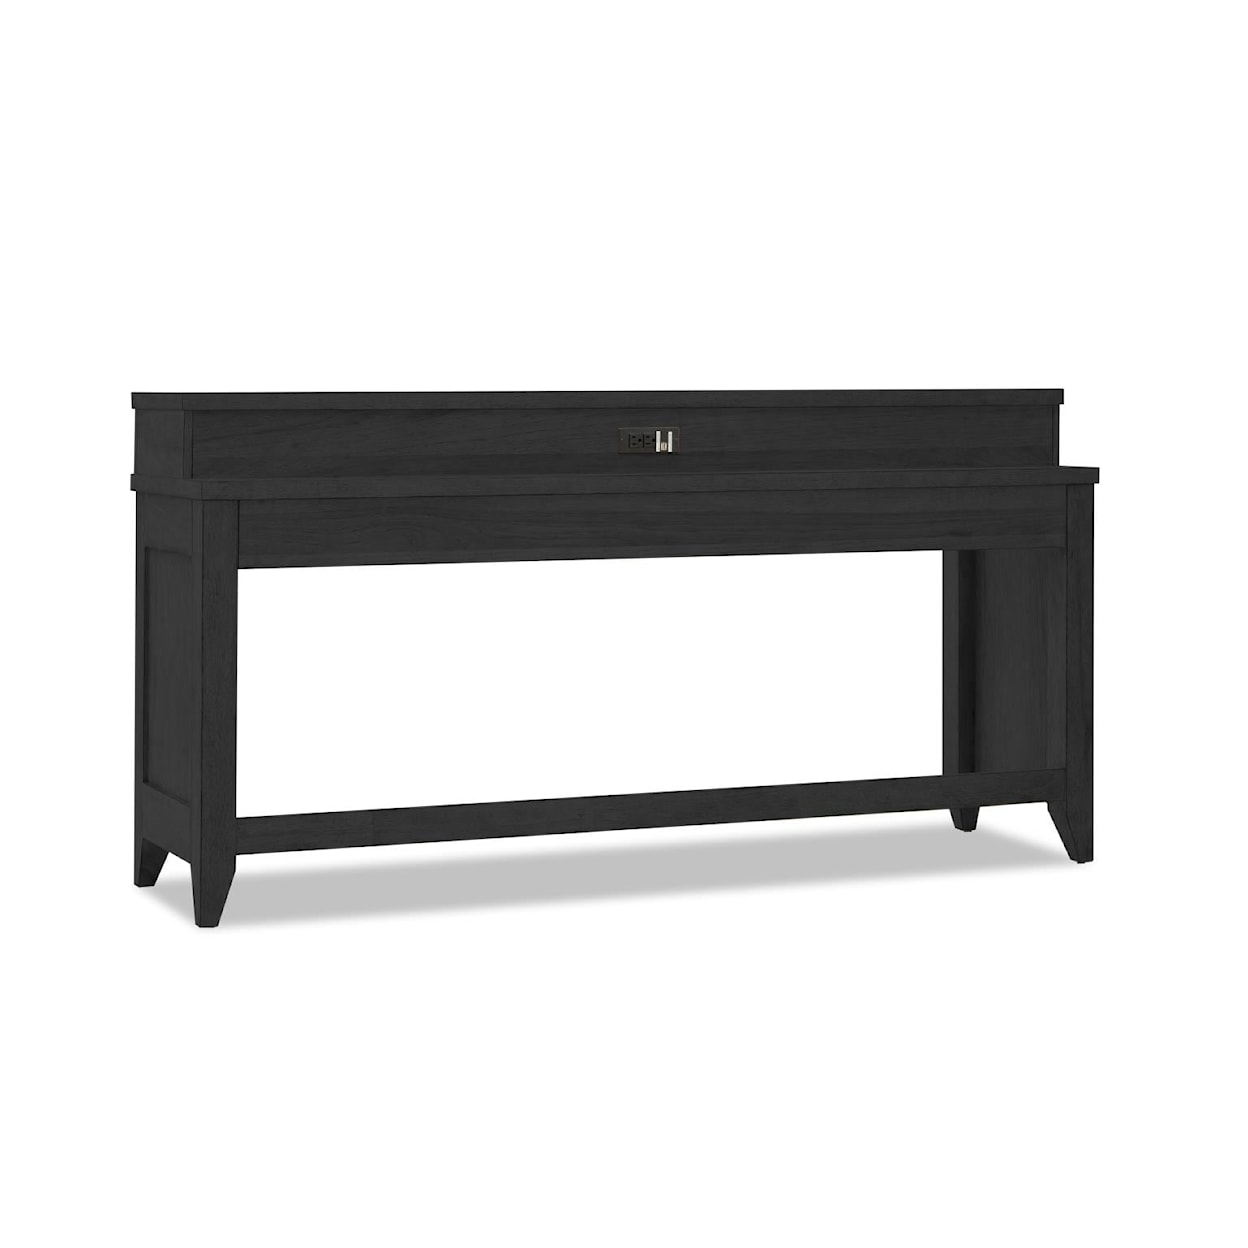 Trisha Yearwood Home Collection by Legacy Classic Today's Traditions Sofa/Bar Console Table